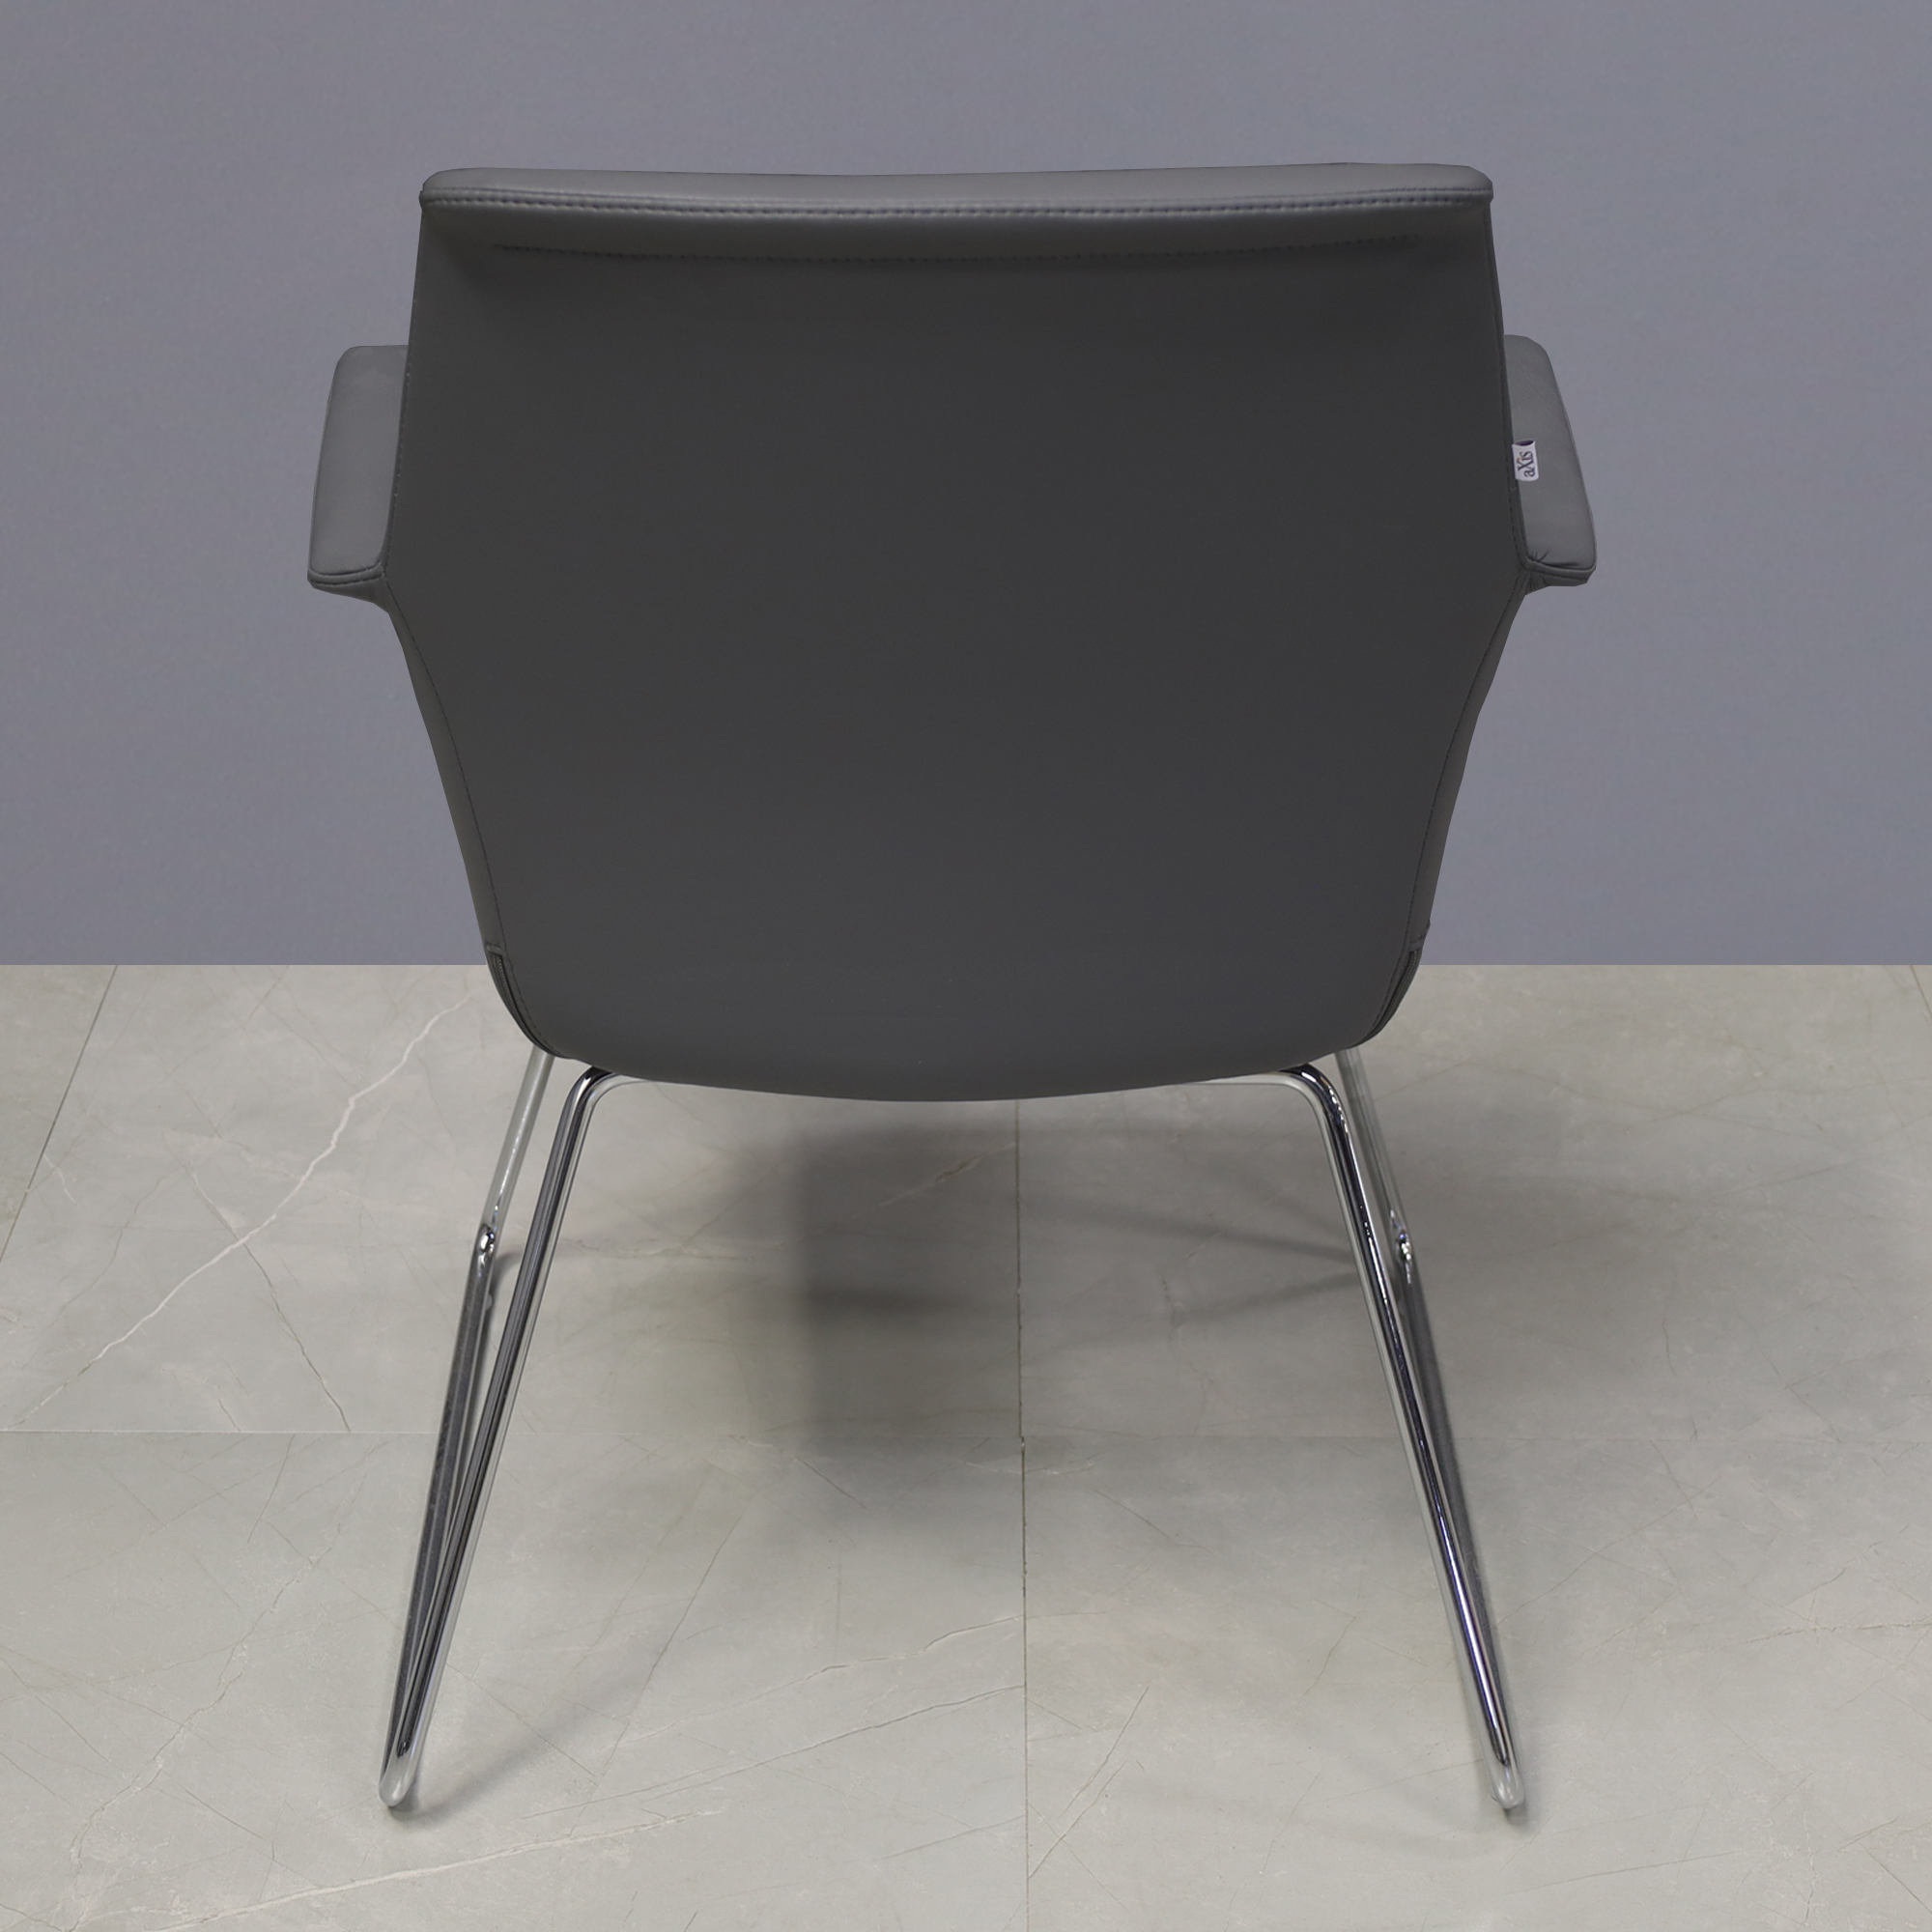 Archi Guest Chair in gray upholstery, shown here.